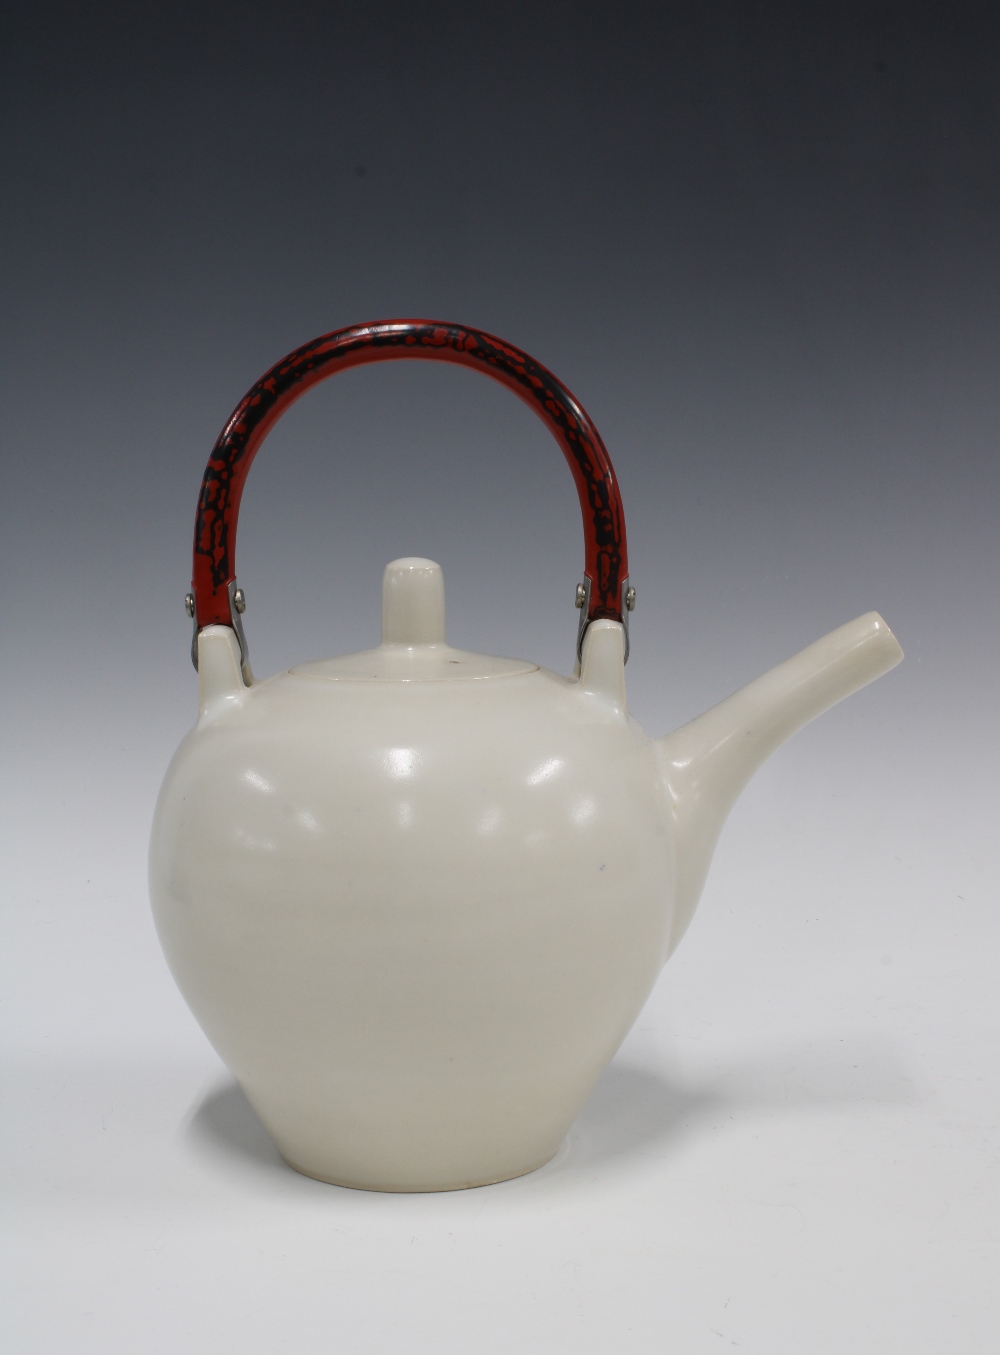 Suleyman Saba, (Australian b.1969) pale celadon glaze teapot with red lacquered handle, overall